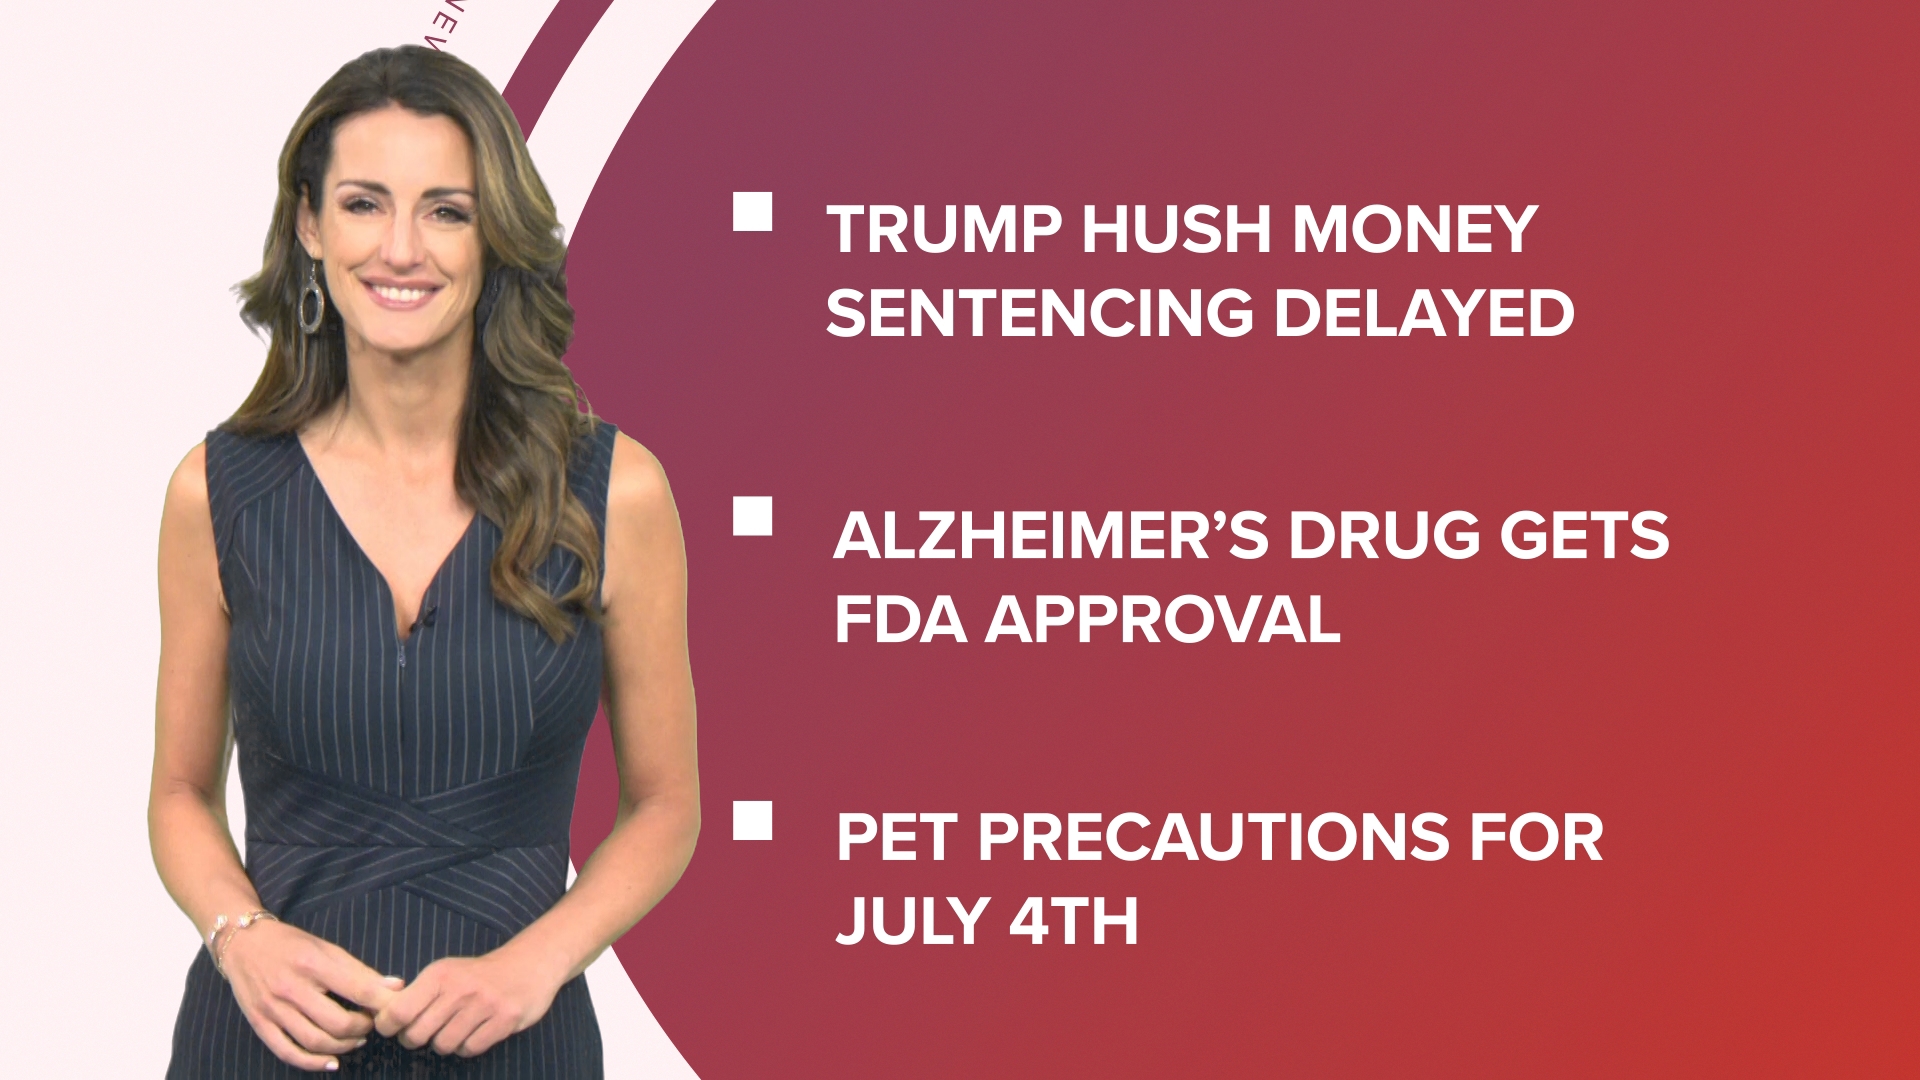 A look at what is happening in the news from Trump's hush money case sentencing delayed to the FDA approves a new Alzheimer's drug and firework safety tips for pets.